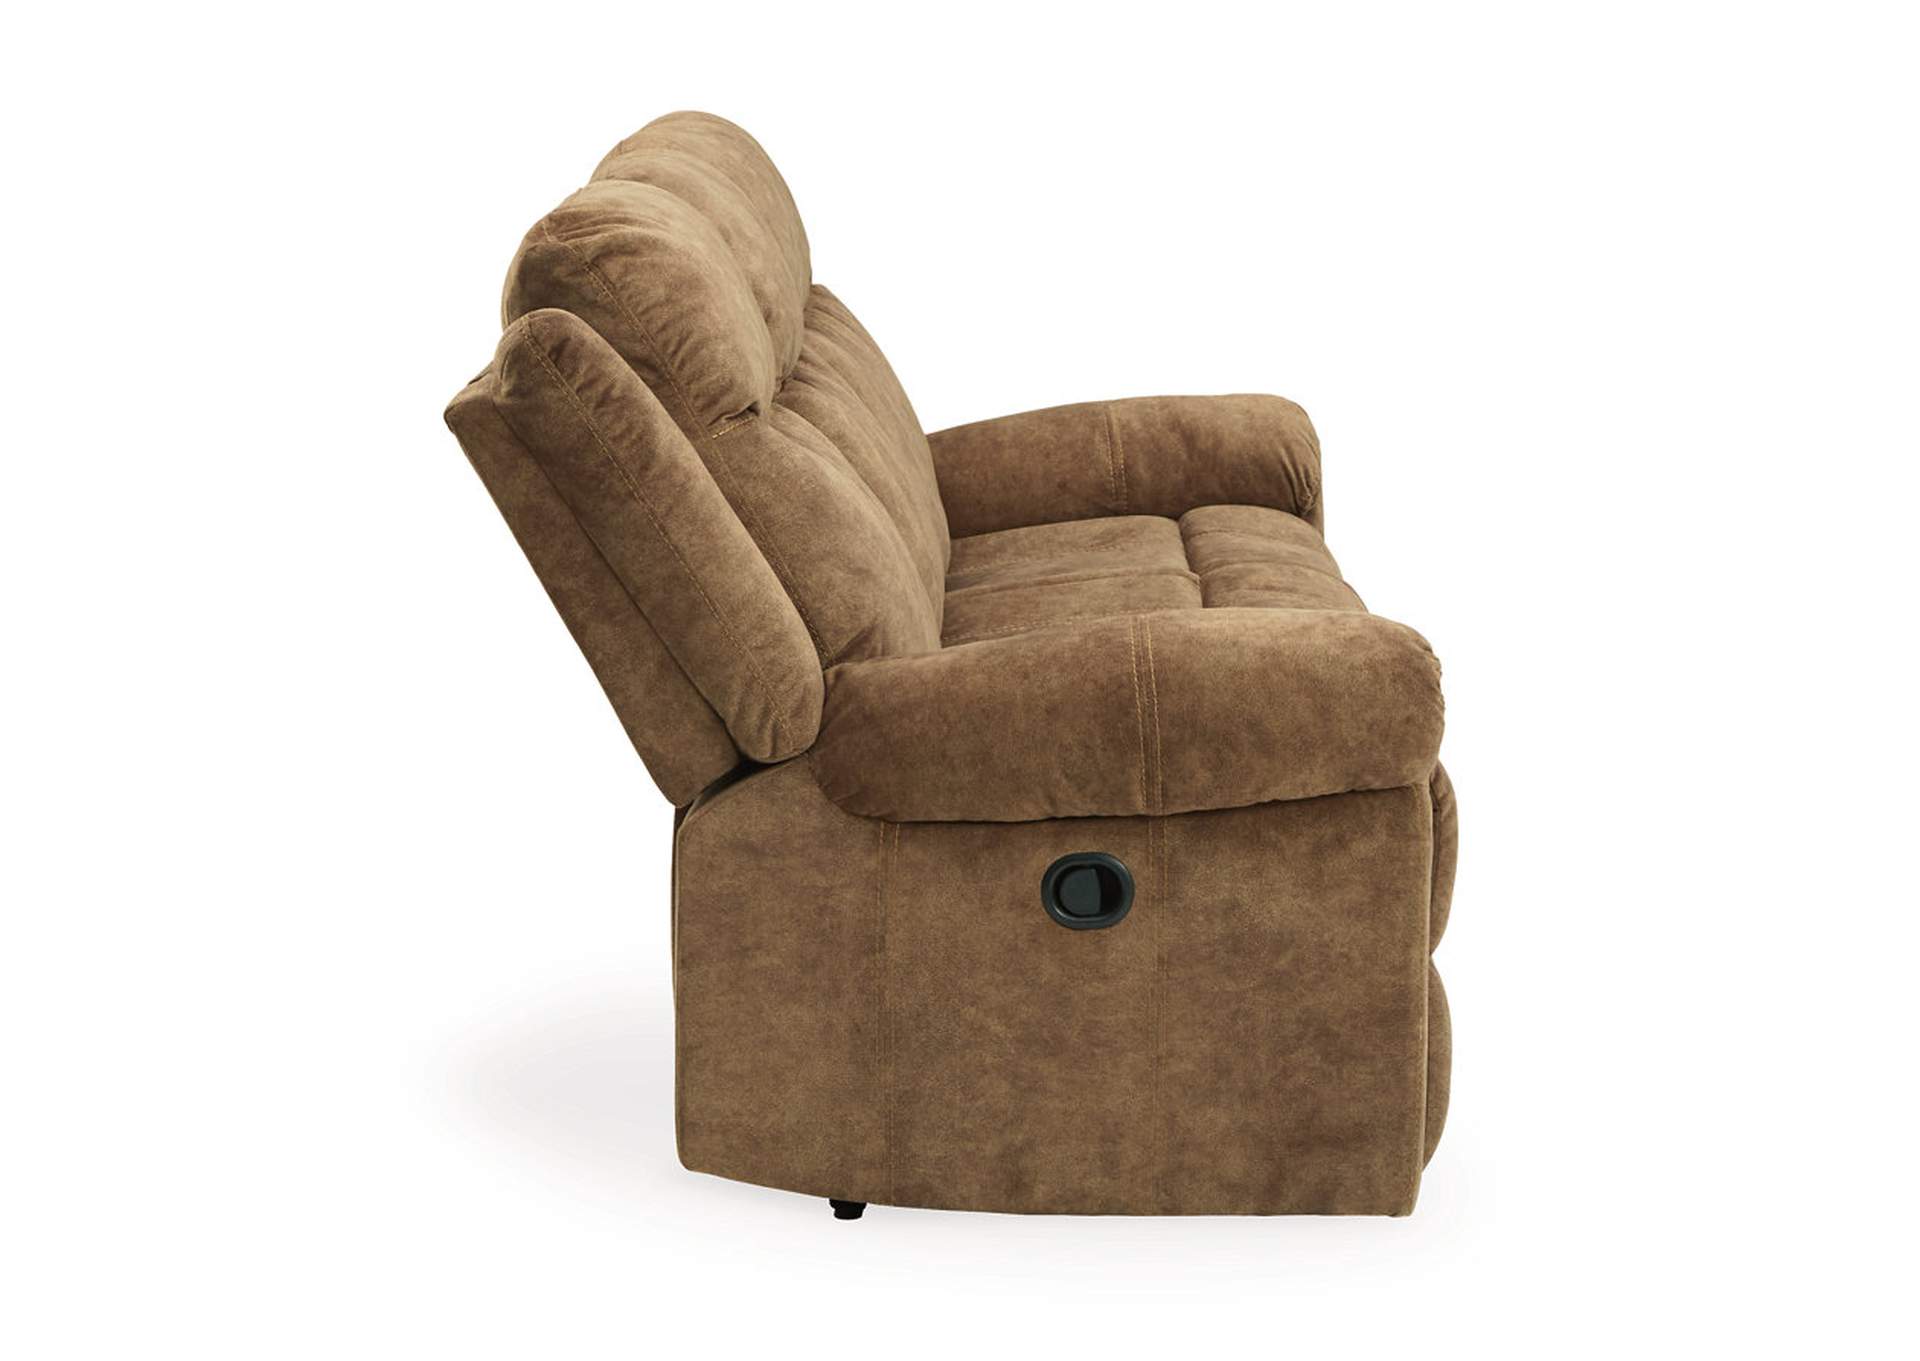 Huddle-Up Sofa, Loveseat and Recliner,Signature Design By Ashley